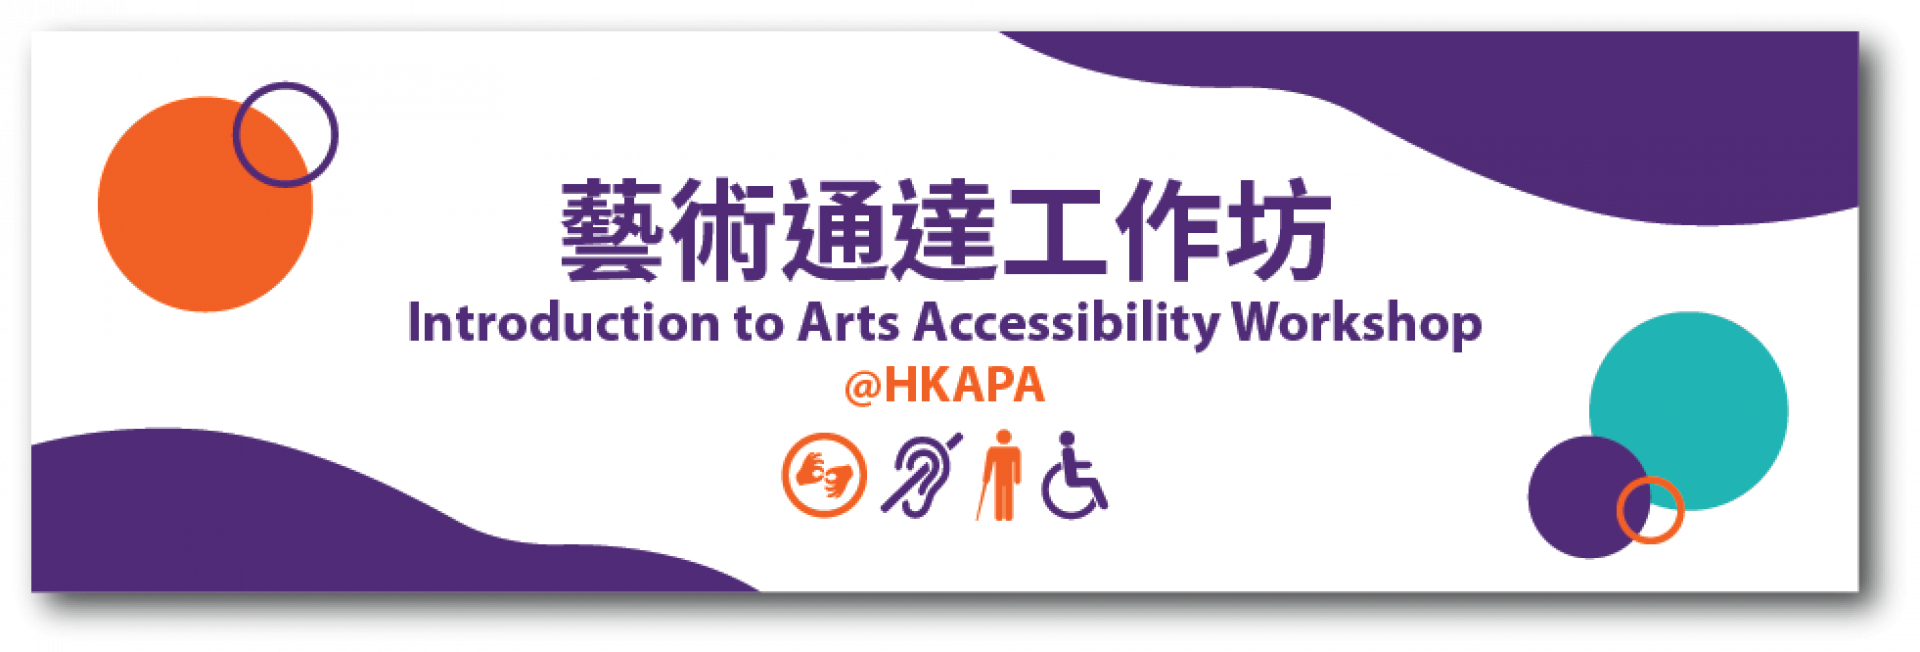 2020/21 Arts Accessibility Workshops Foster Social Inclusion